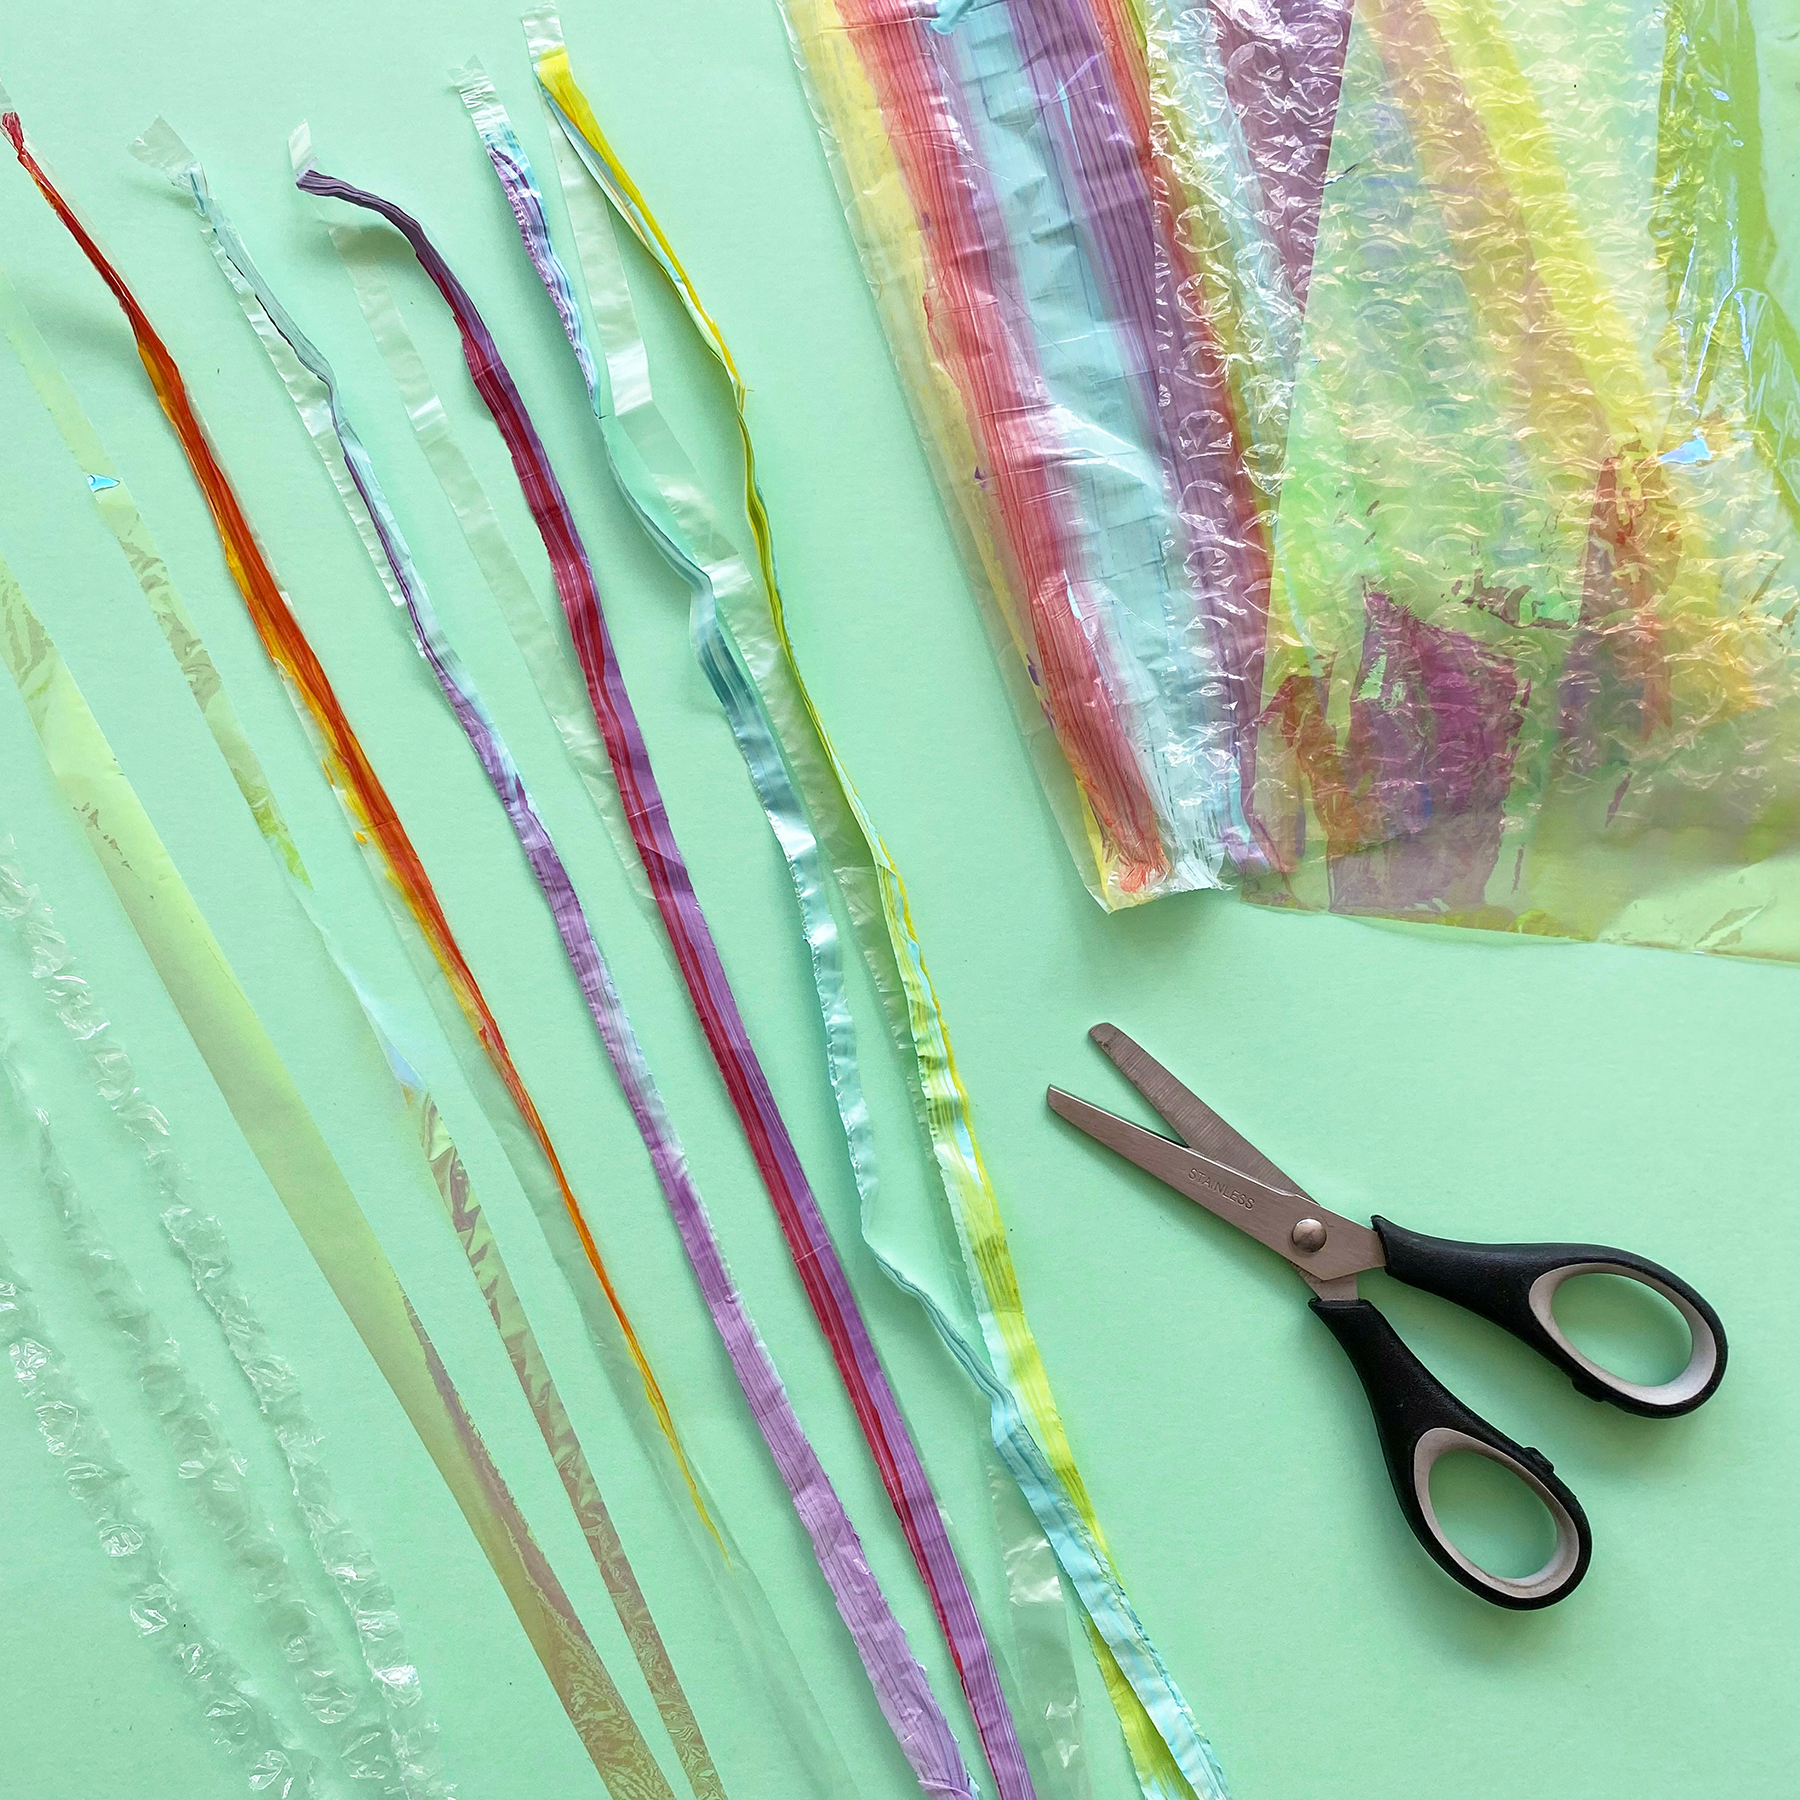 A photo of a pair of scissors alongside a painted plastic bag and cellophane that has been cut into long thin strips on a mint green background